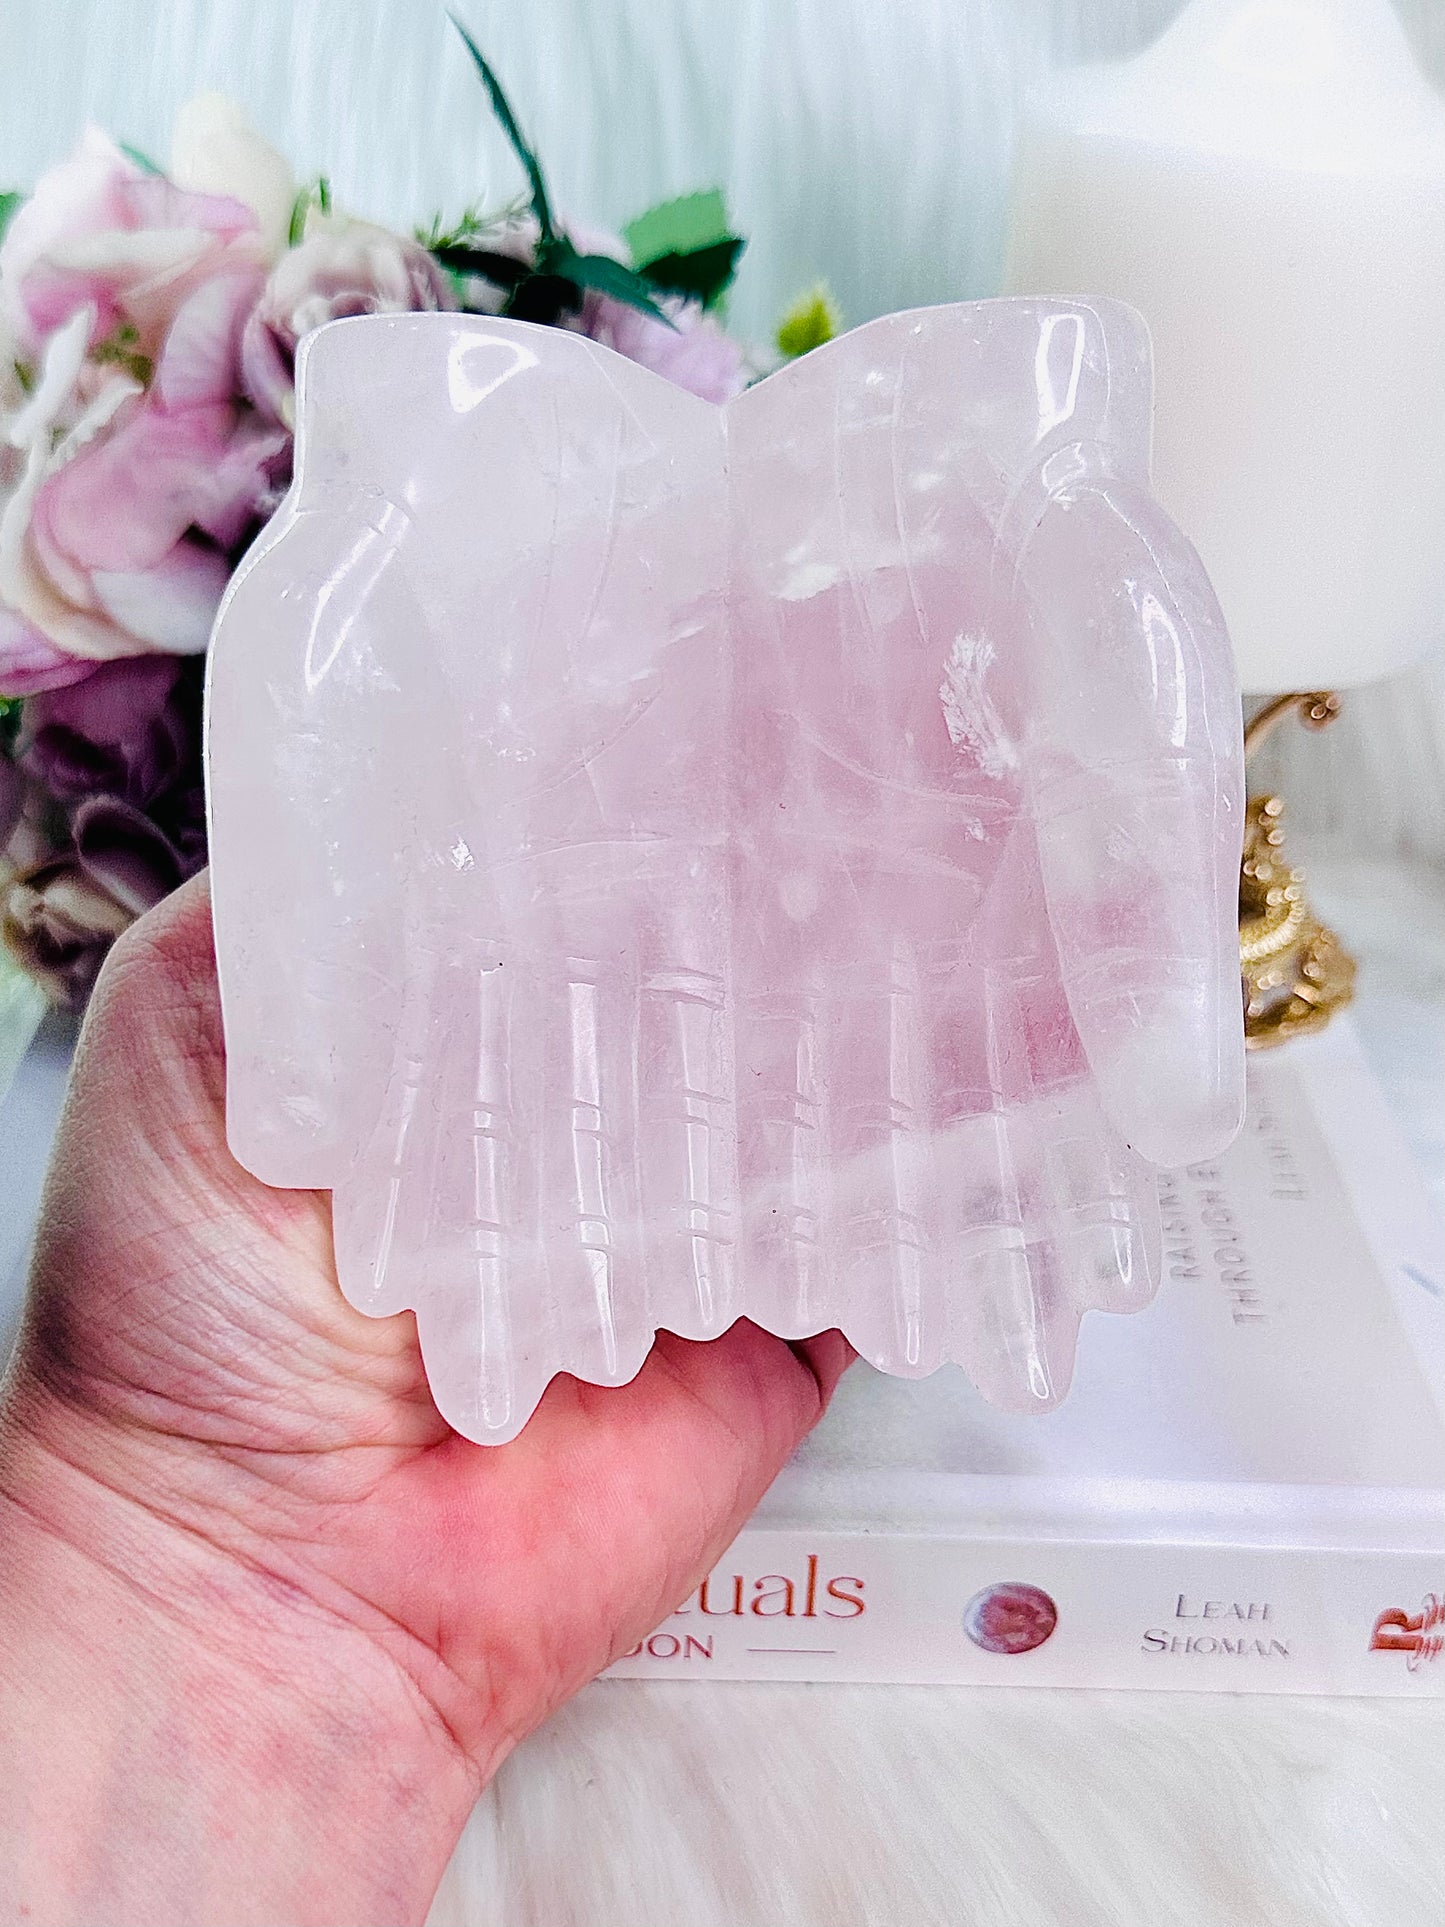 Classy & Fabulous Large 615Grams Rose Quartz Healing Hands Carving Absolutely Gorgeous